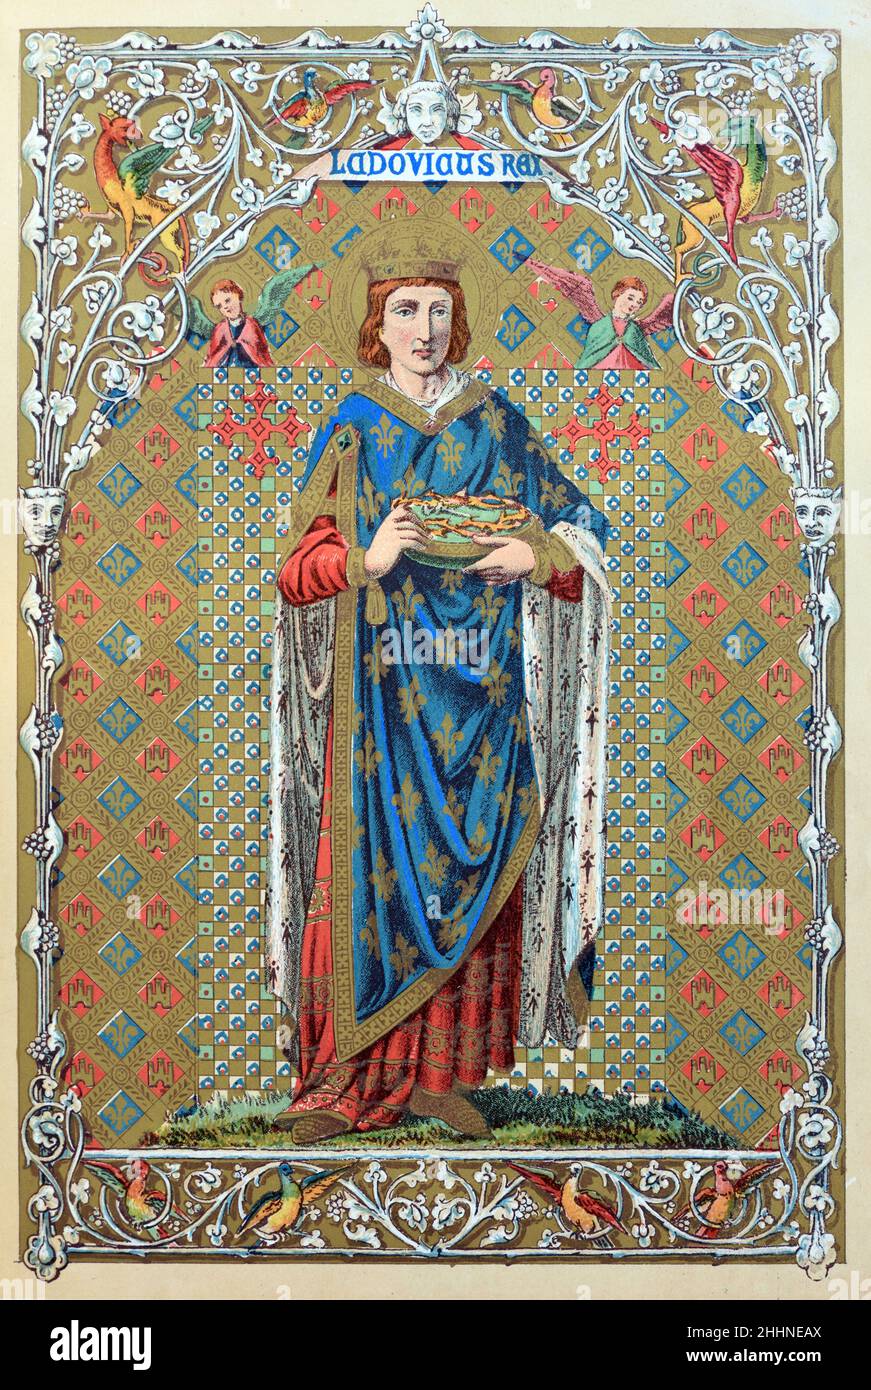 Full Length Portrait of Saint Louis or King Louis IX of France (1214-1270). Chromolithograph from 1887 Edition of Butler's Lives of the Saints. Stock Photo